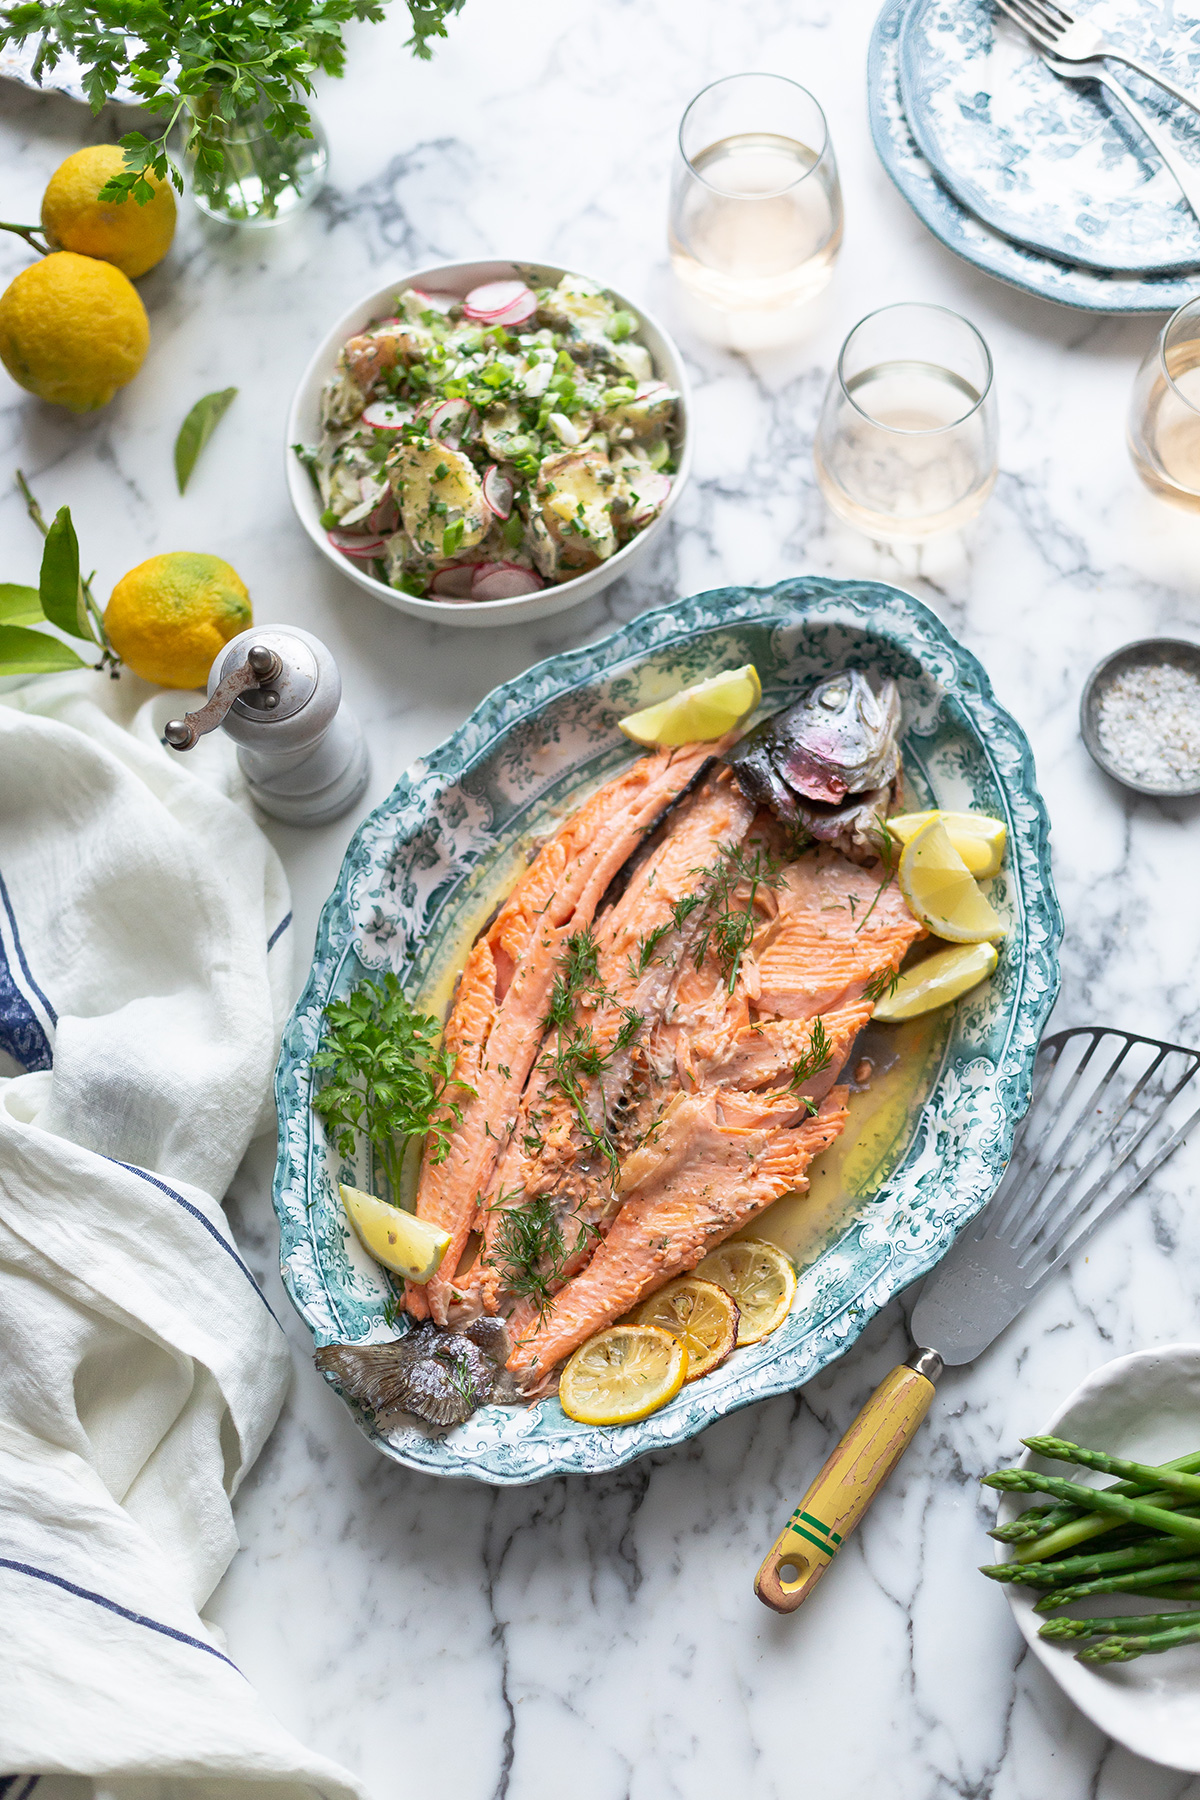 A platter of whole roasted trout with a new potato and herb salad